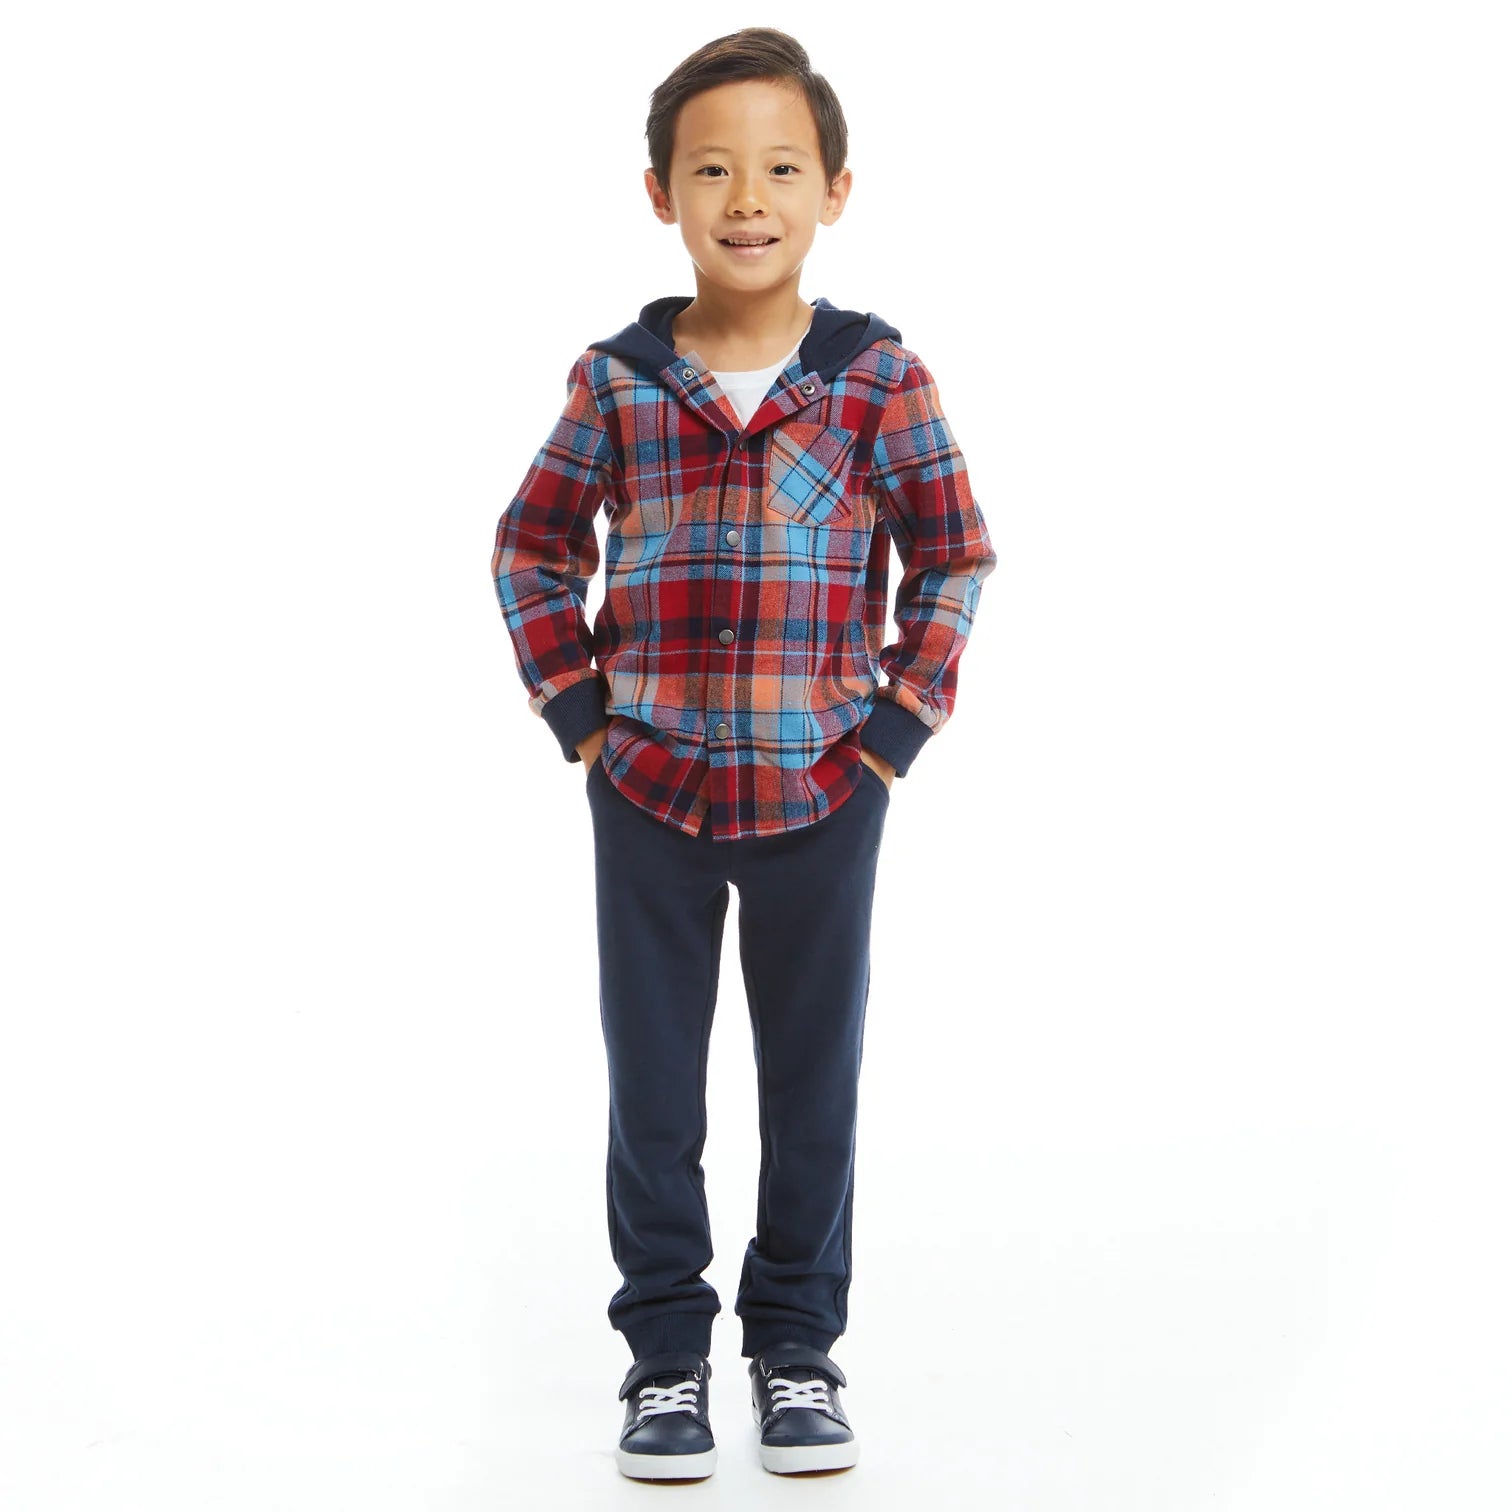 Hooded Flannel Button Down Set in Navy and Red Plaid  - Doodlebug's Children's Boutique